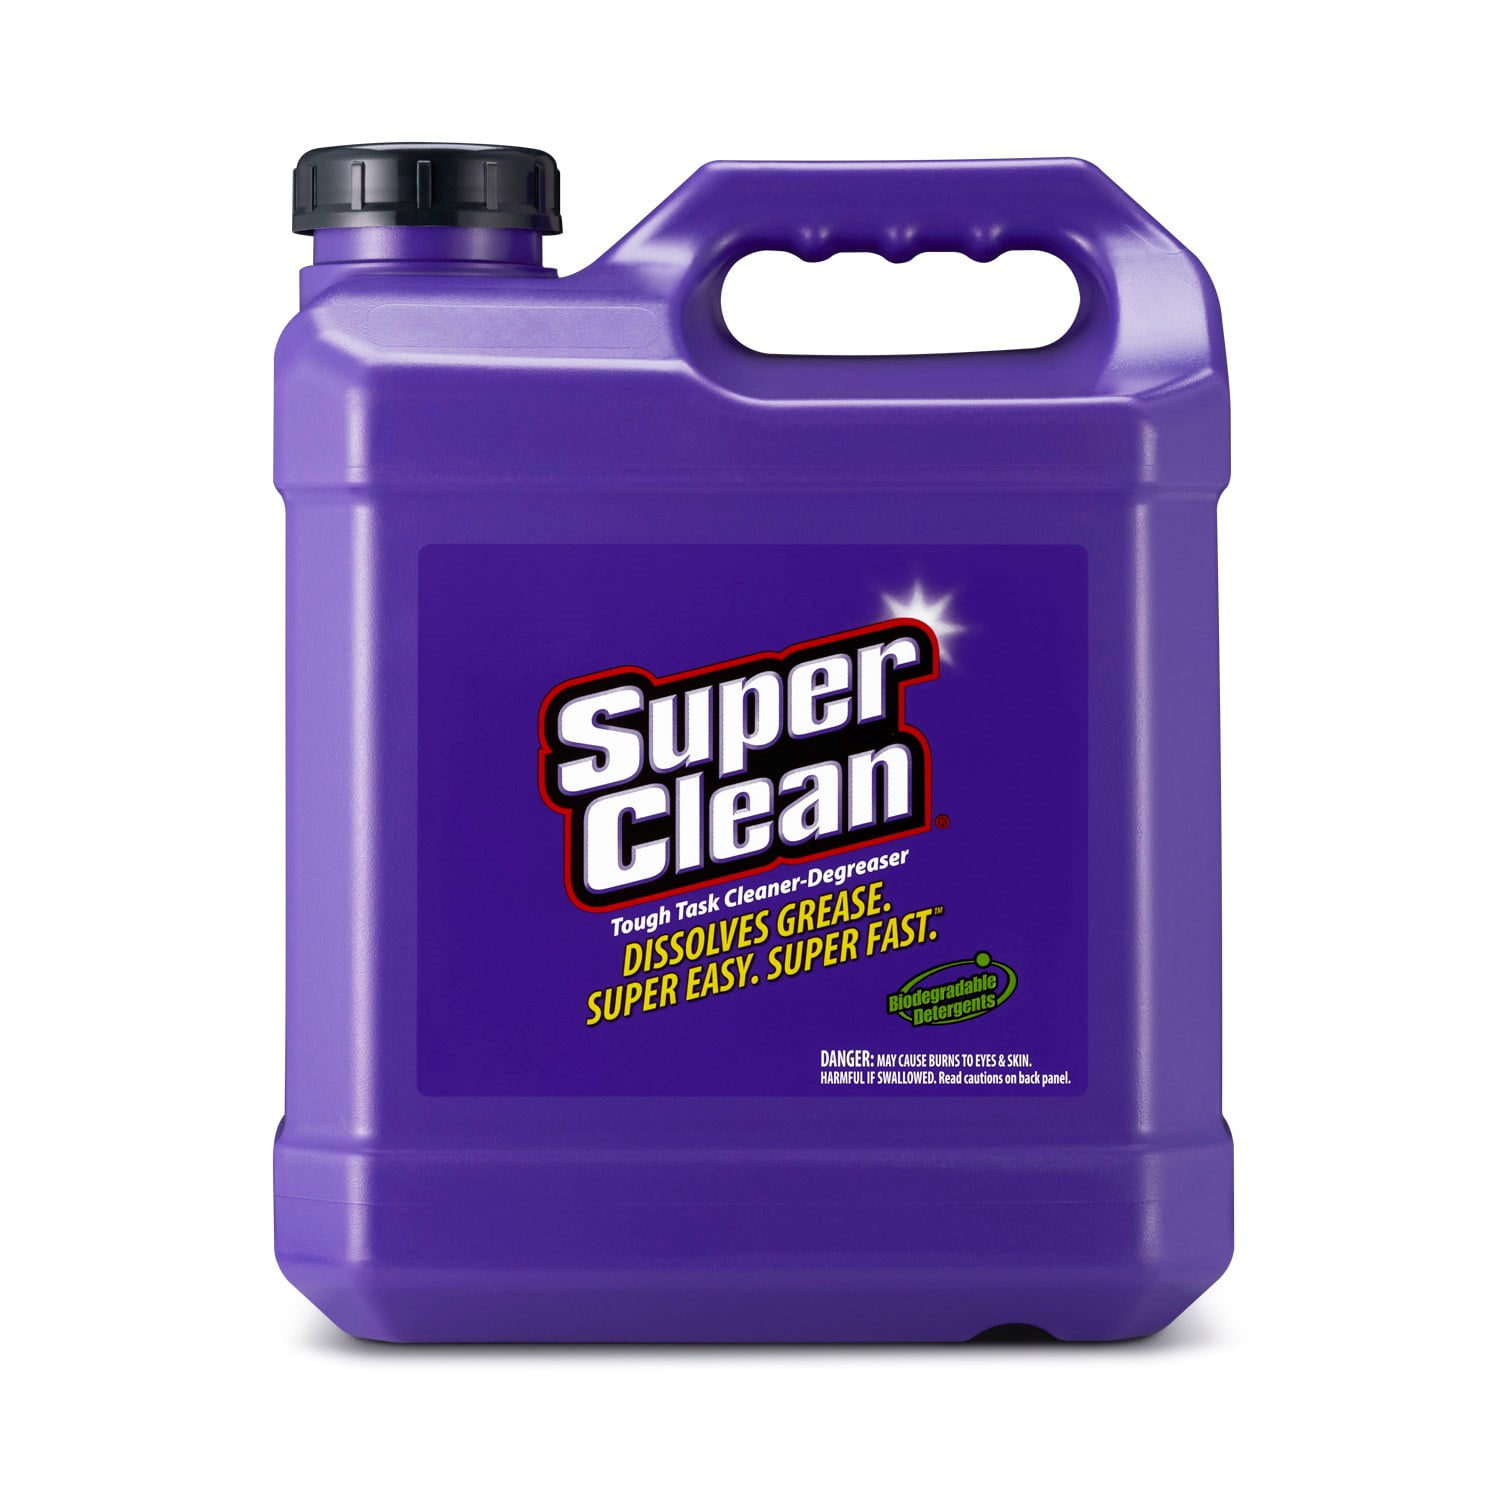 Officially Replacing Super Clean Degreaser 